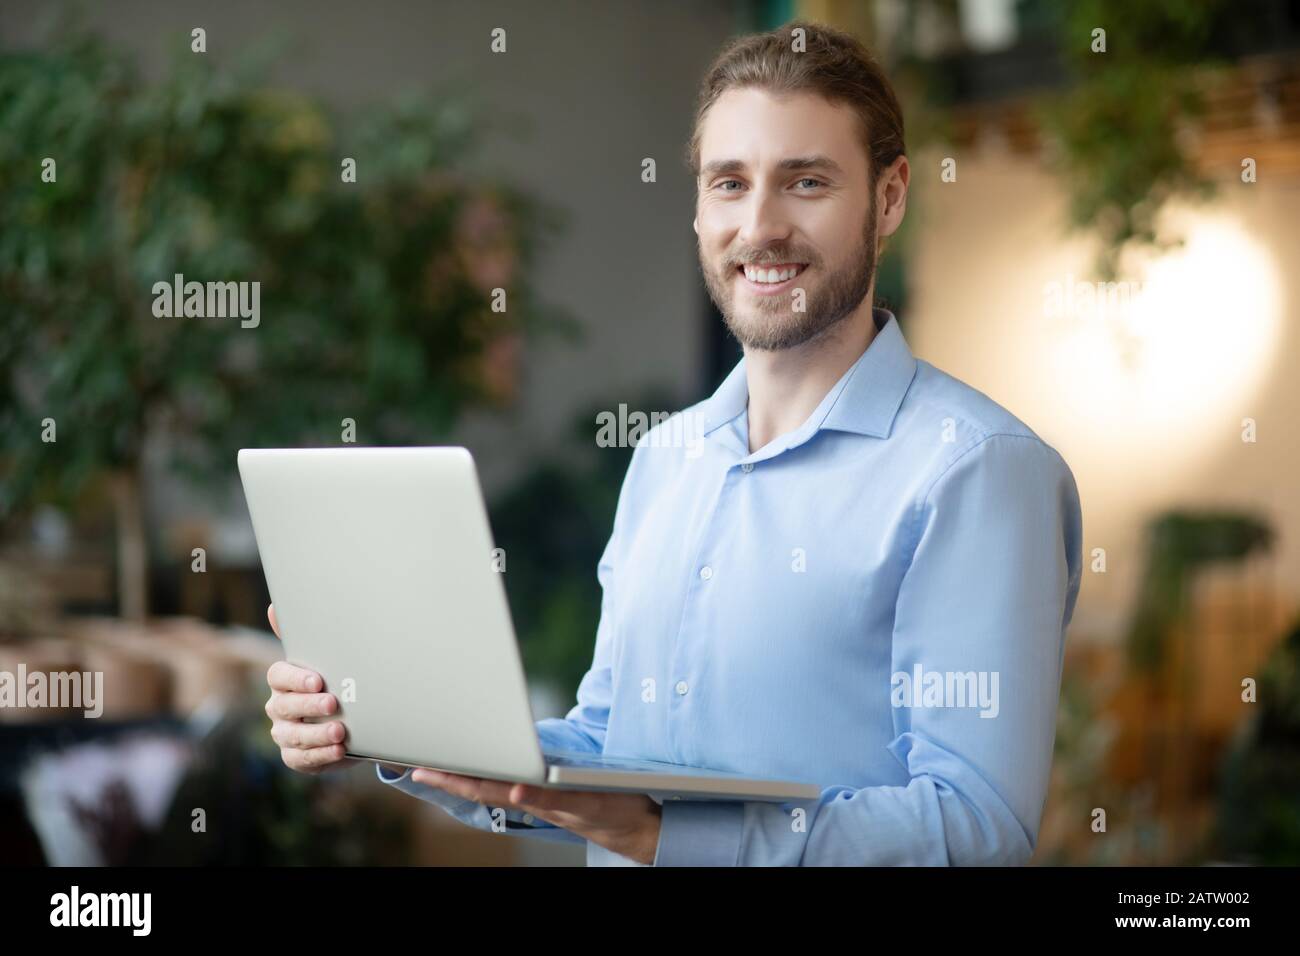 Good working day. Young smiling man in a light blue shirt holding a laptop in his hands, in a good mood. Stock Photo